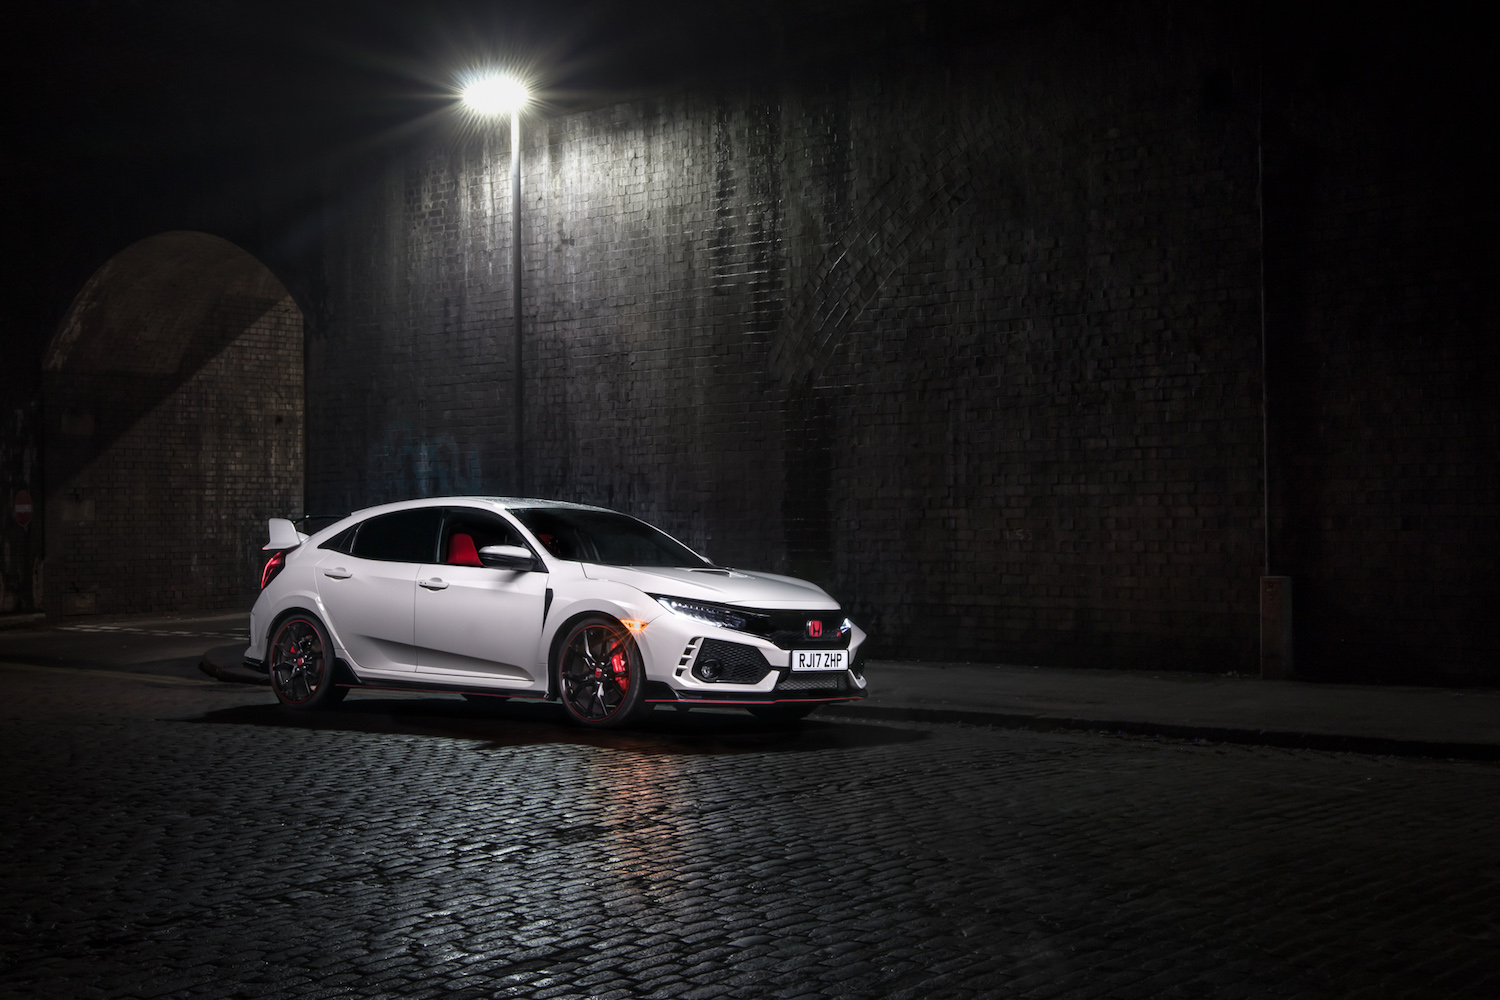 Fk8 Honda Civic Type R Everything You Need To Know In 2019